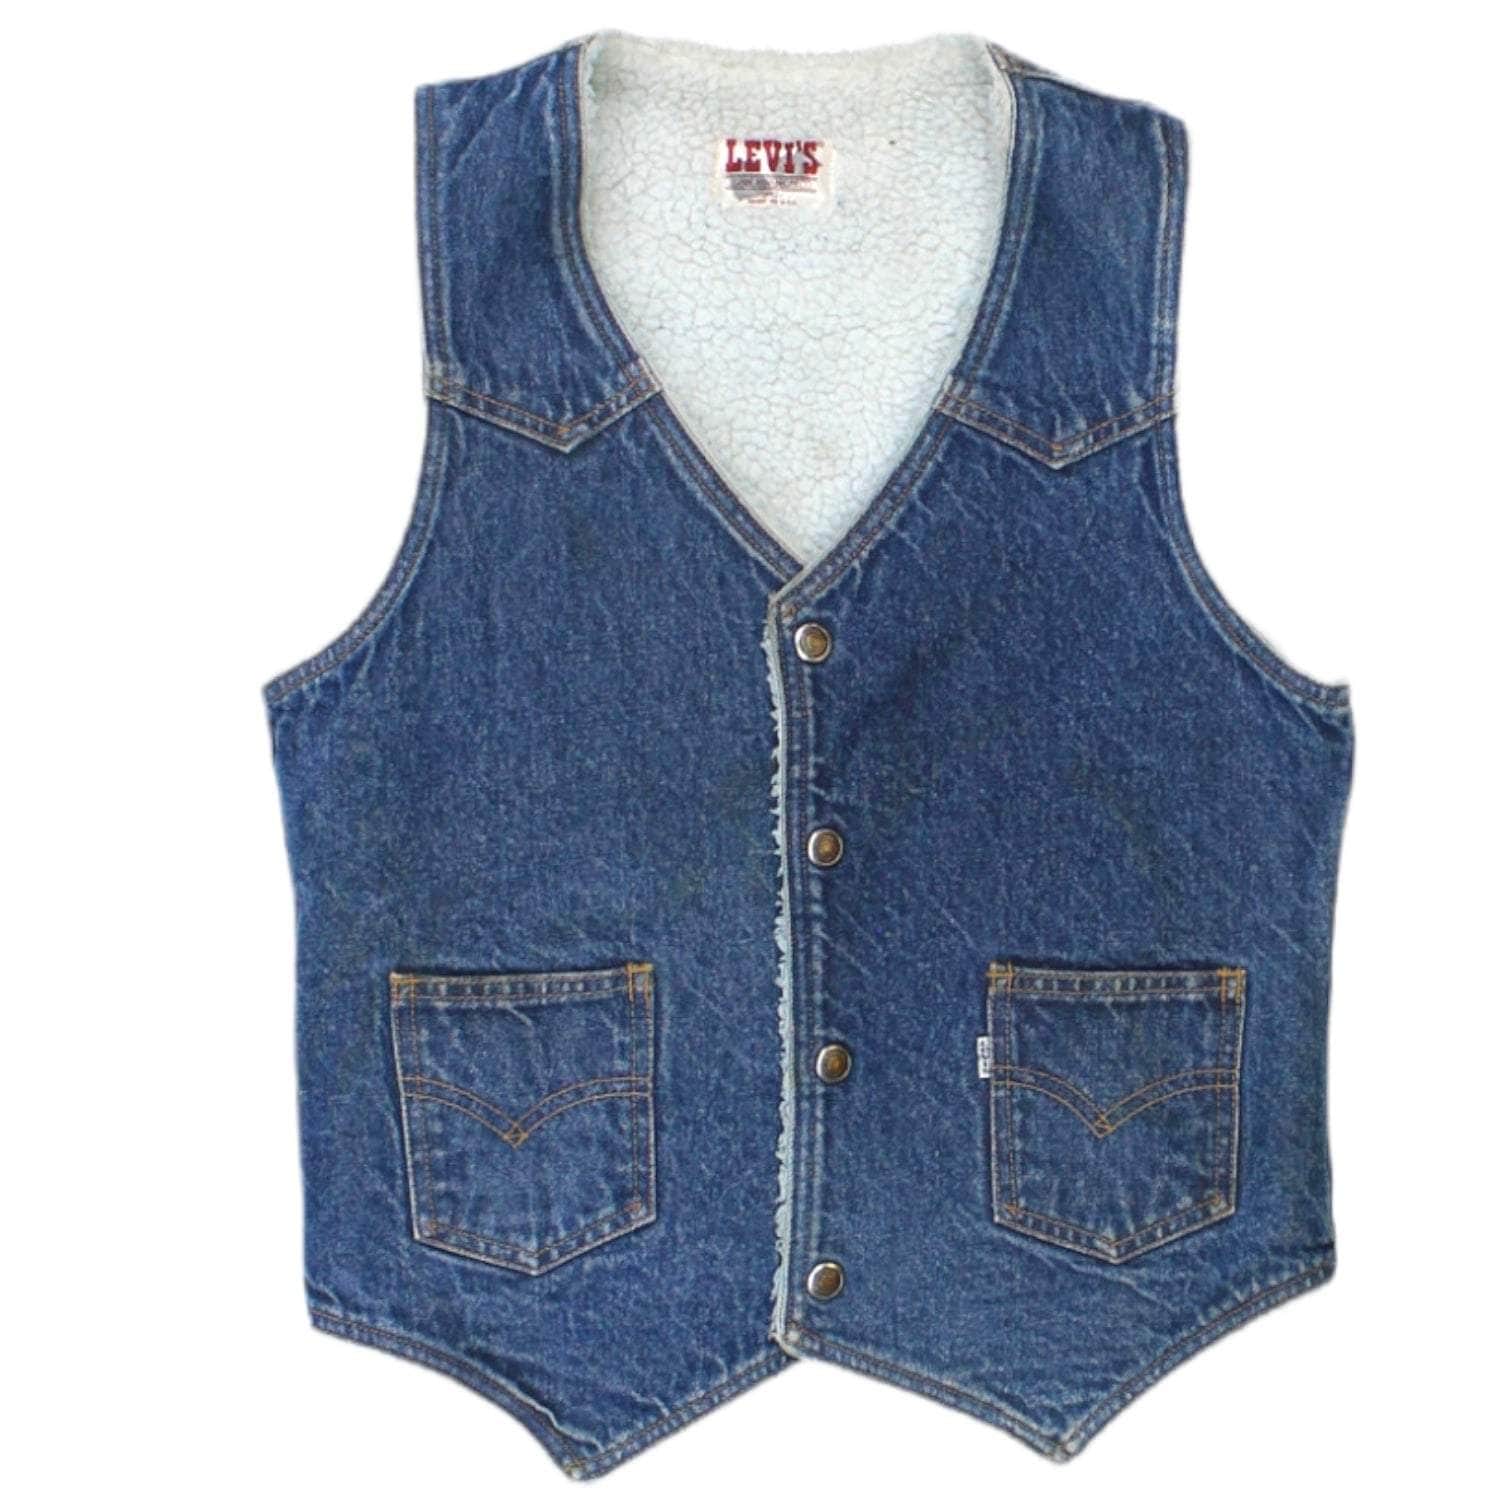 Vintage Levi's Shearling Waistcoat | Shop from Crisis Online